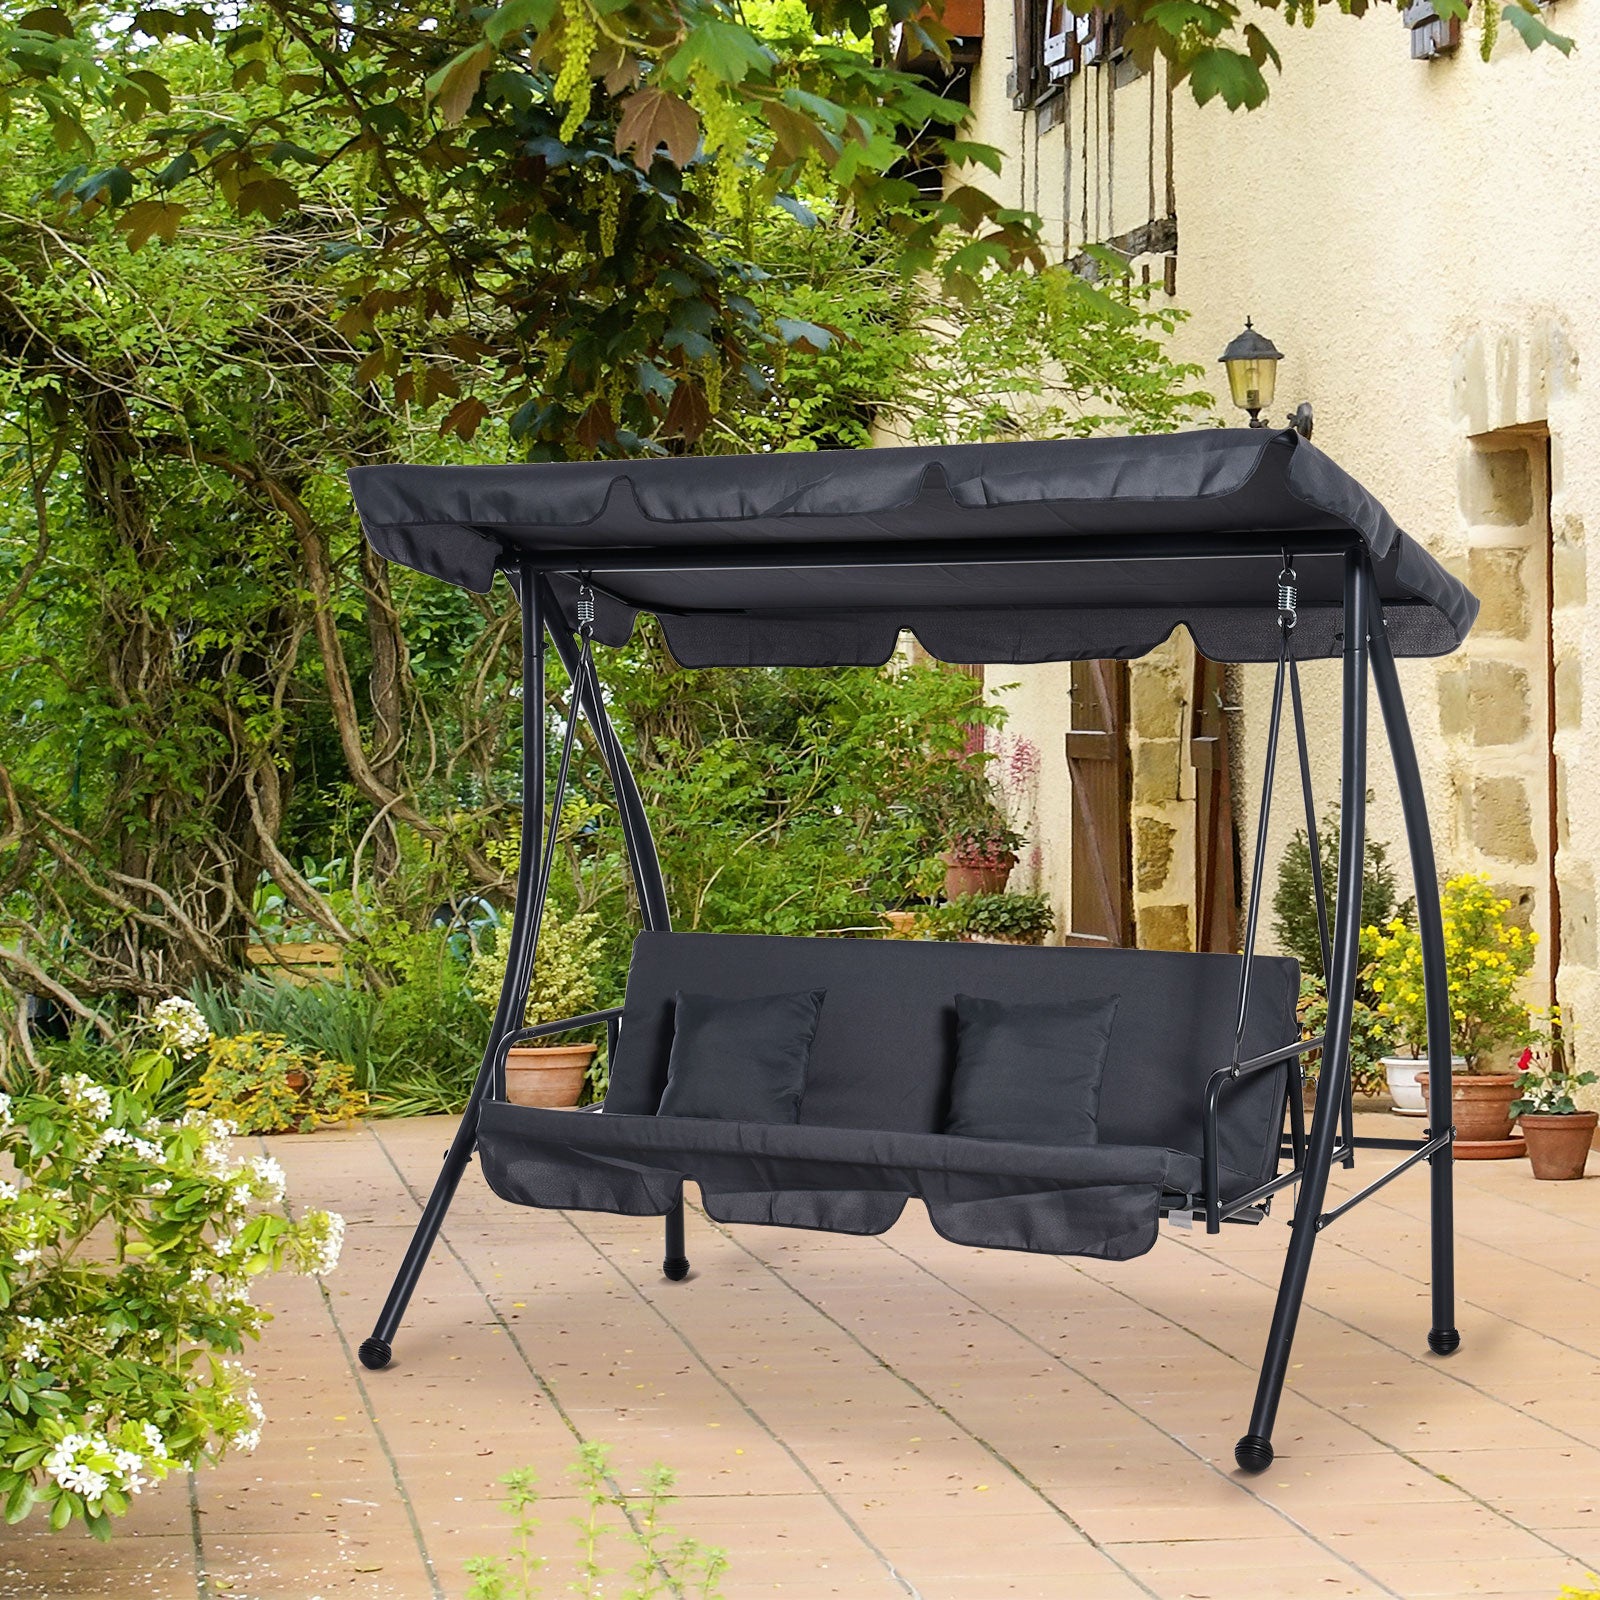 Outsunny 2-in-1 Patio Swing Chair Lounger 3 Seater Garden Swing Seat w/ Convertible Tilt Canopy and Cushion, Dark Grey - Inspirely